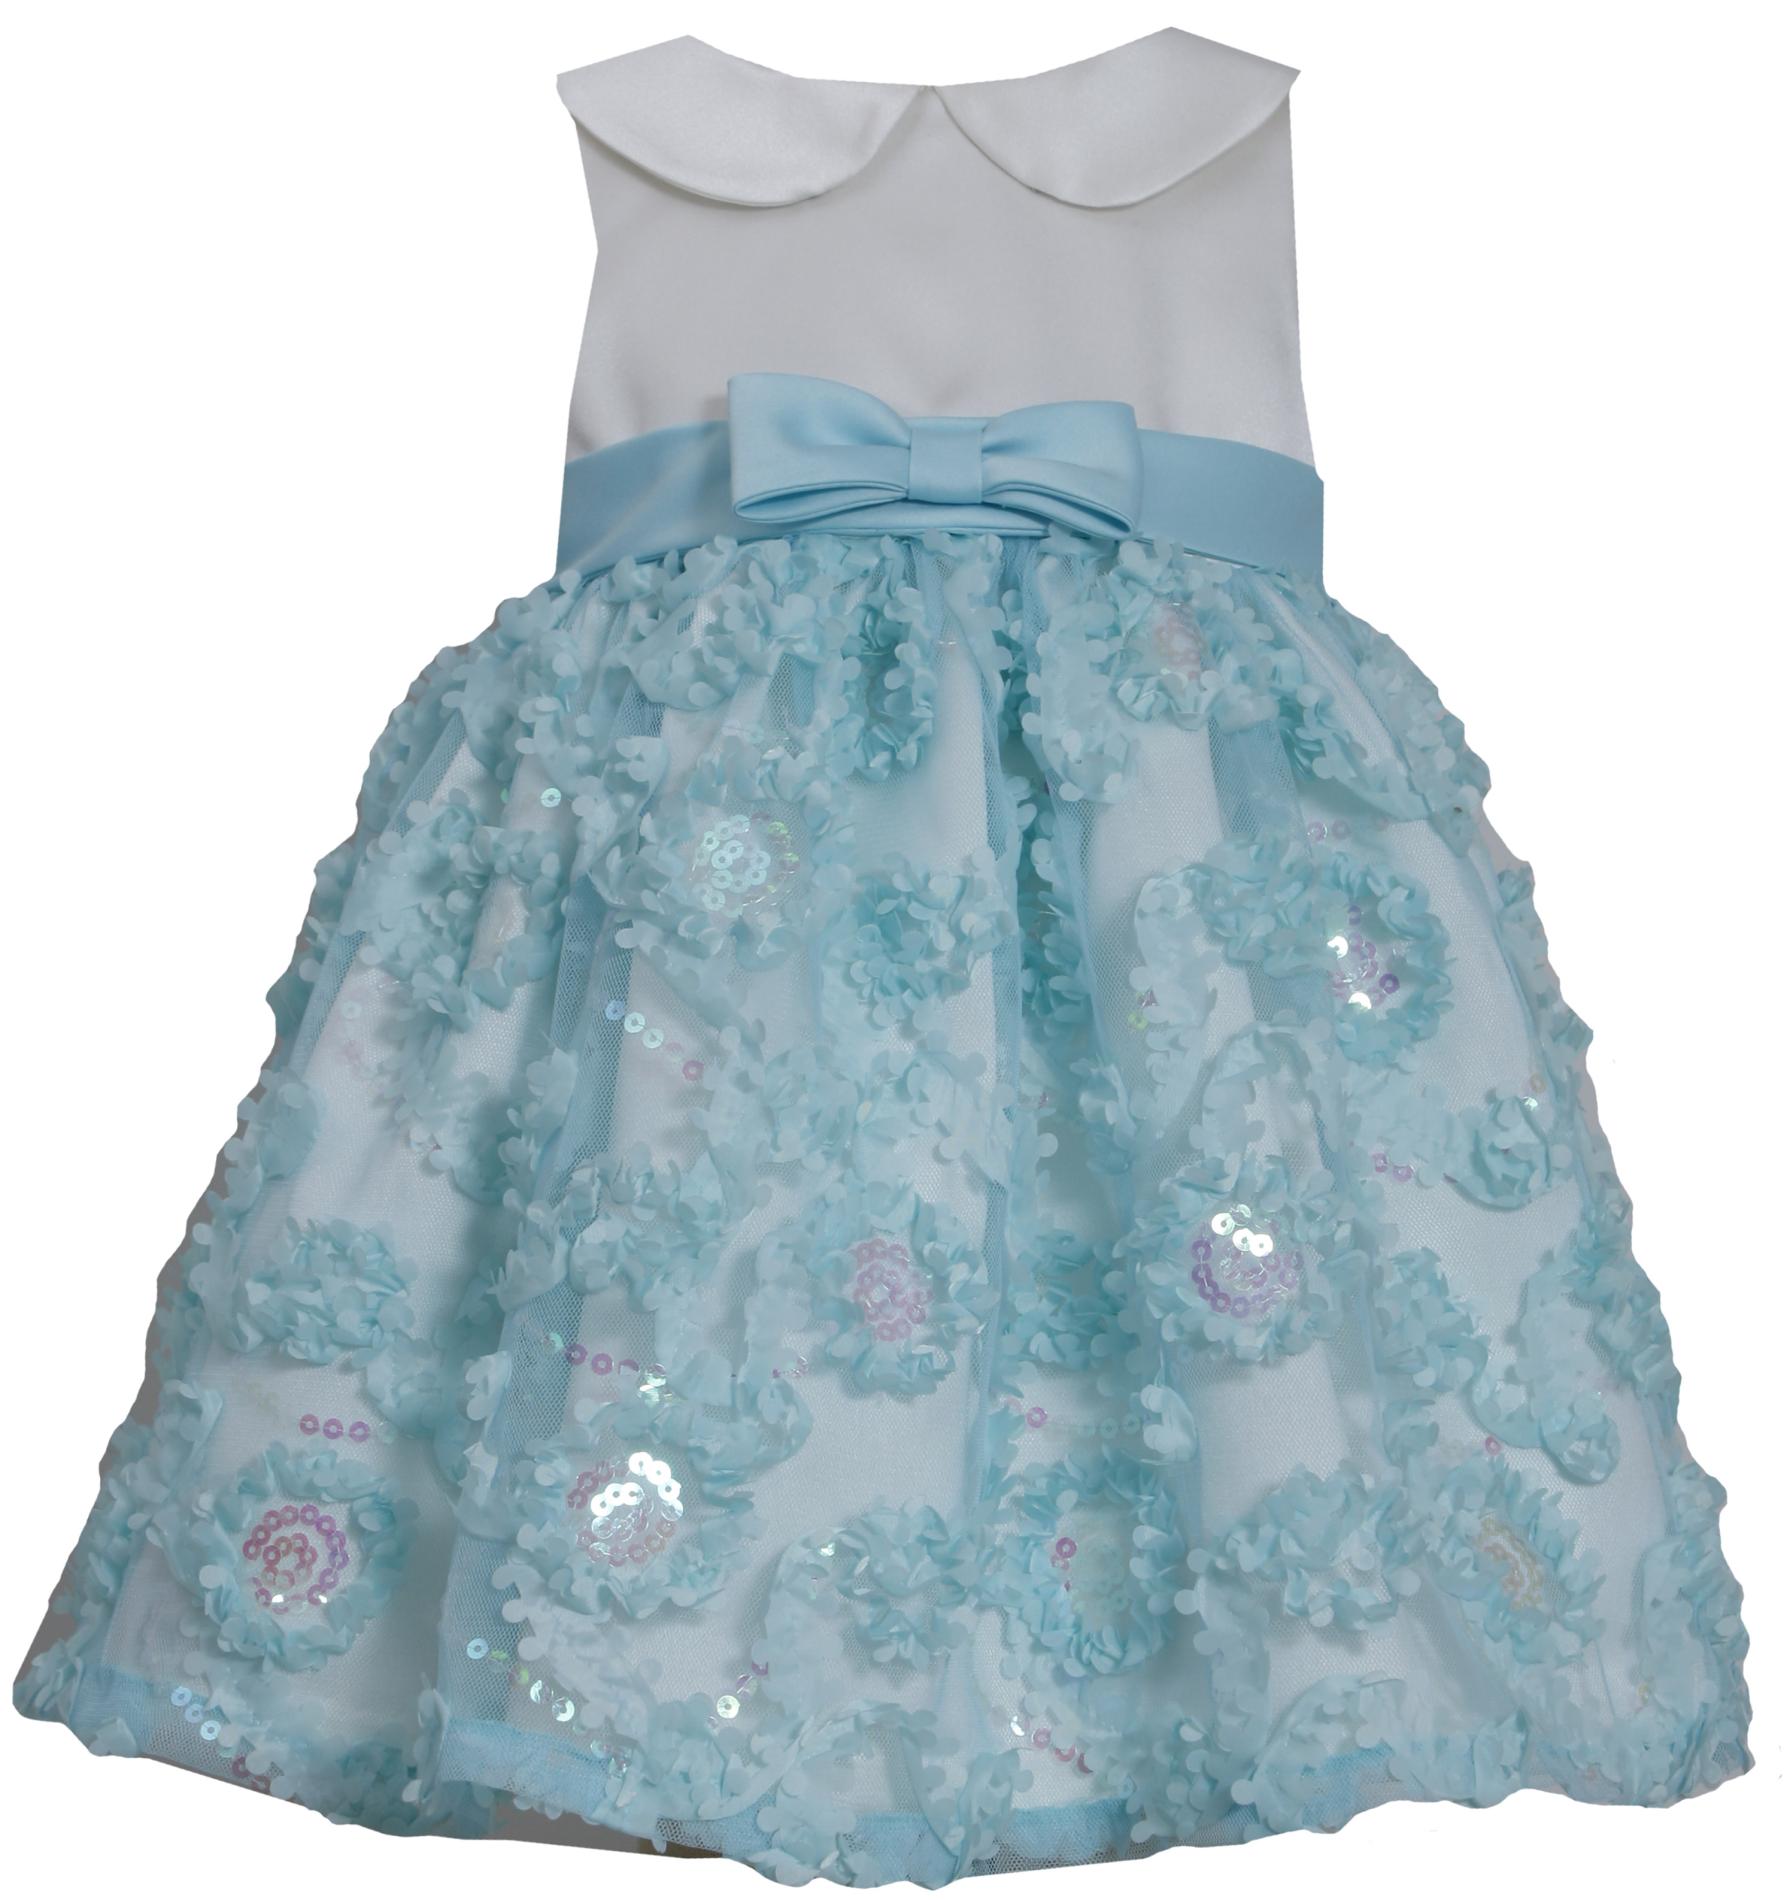 Ashley Ann Infant & Toddler Girl's Collared Soutache Party Dress